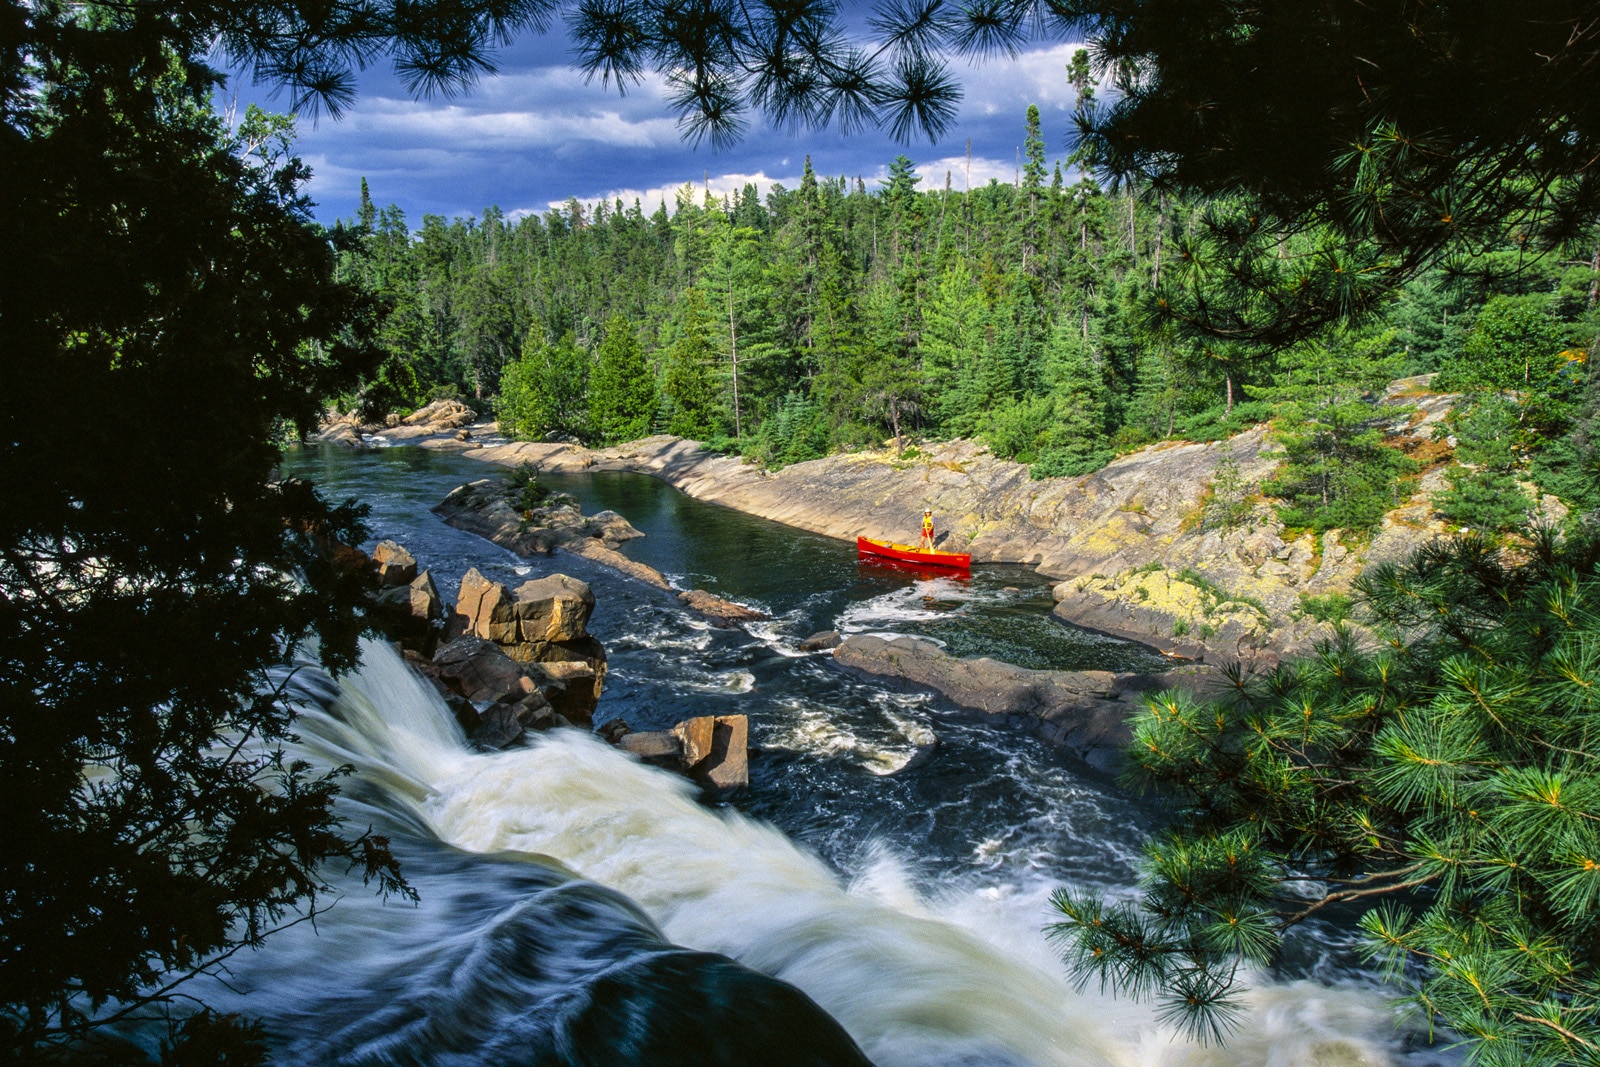 Canoer on shore of river with rapids